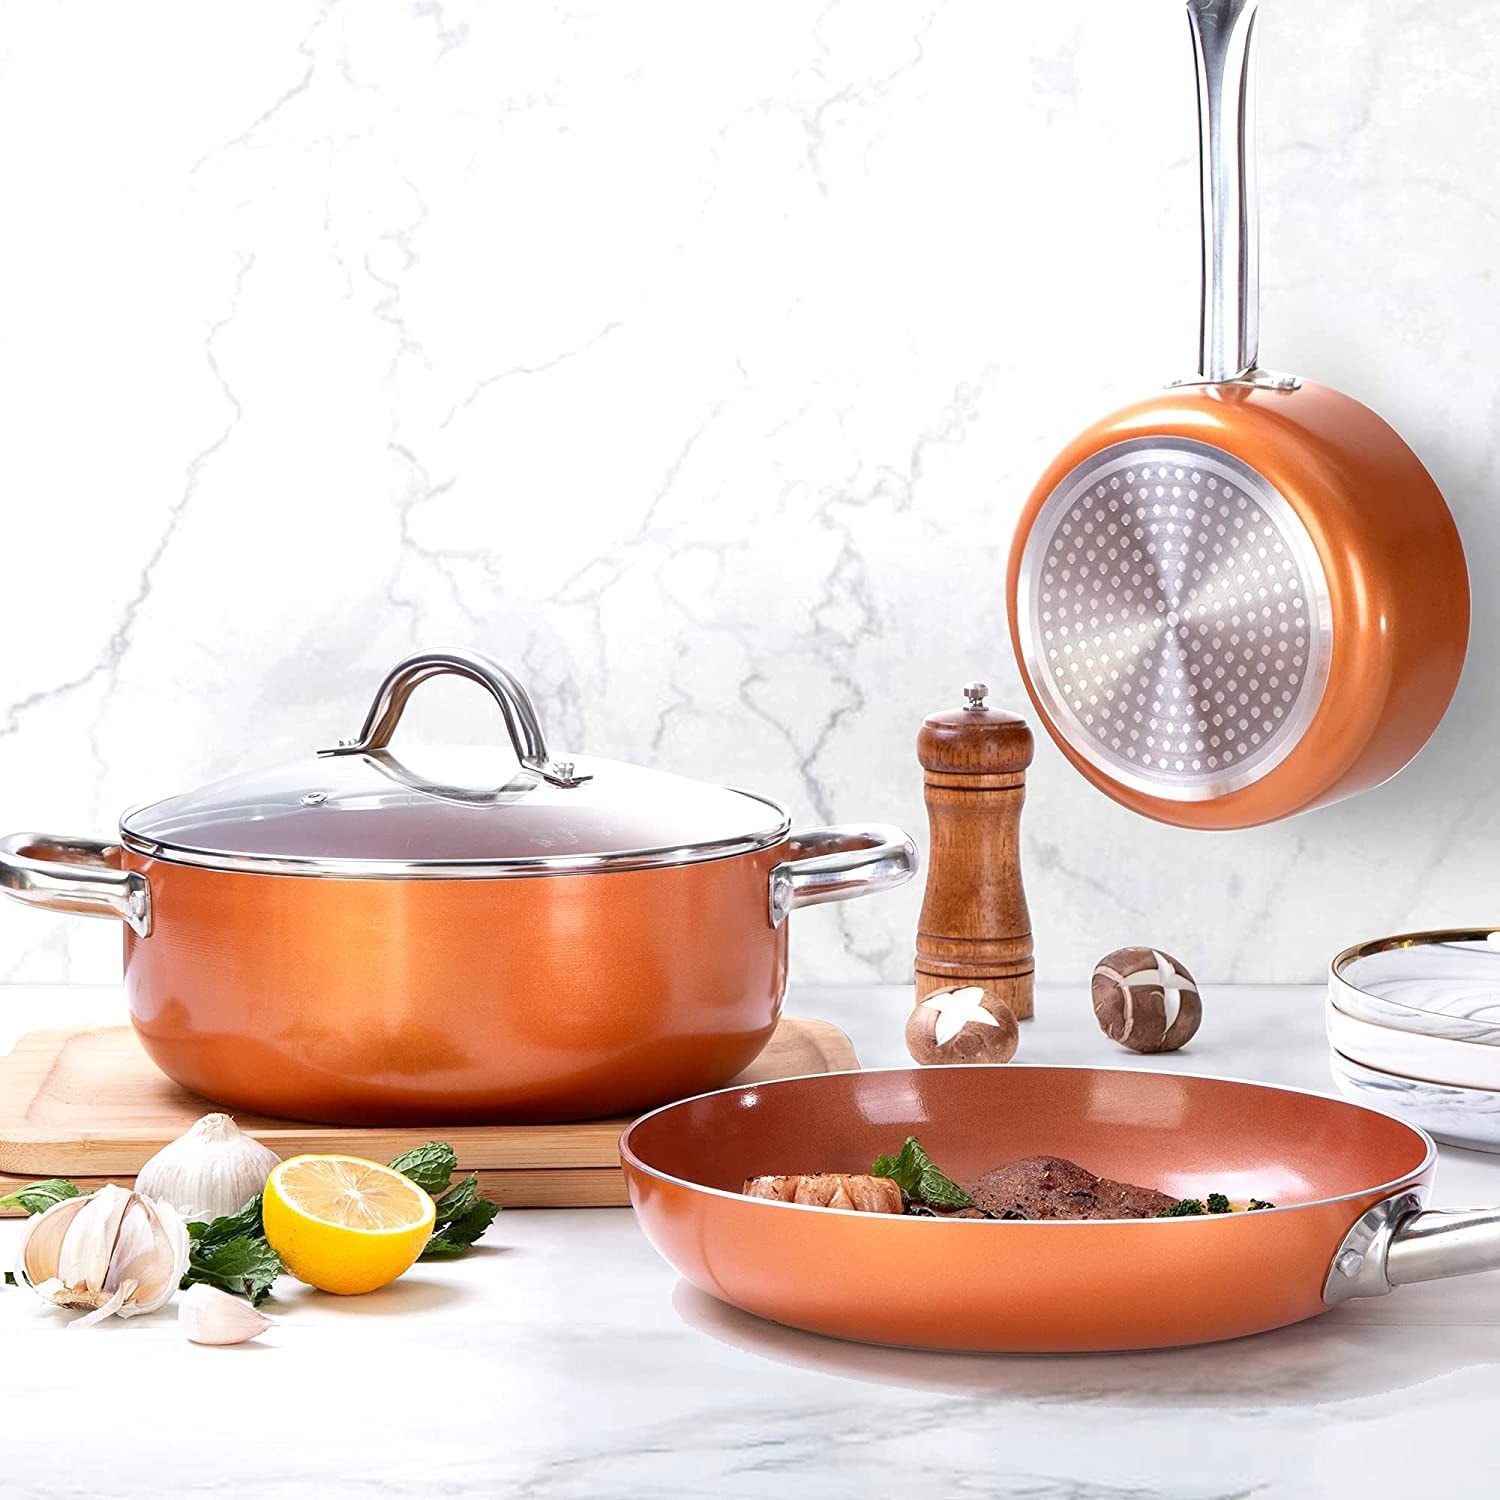 https://ak1.ostkcdn.com/images/products/is/images/direct/e8d2c58fa776960b2ae278c23d571d5a464407e4/Copper-Pots-and-Pans-Set-Nonstick-10-Piece-Ceramic-Cookware-Set%2C-Stainless-Steel-Handles.jpg